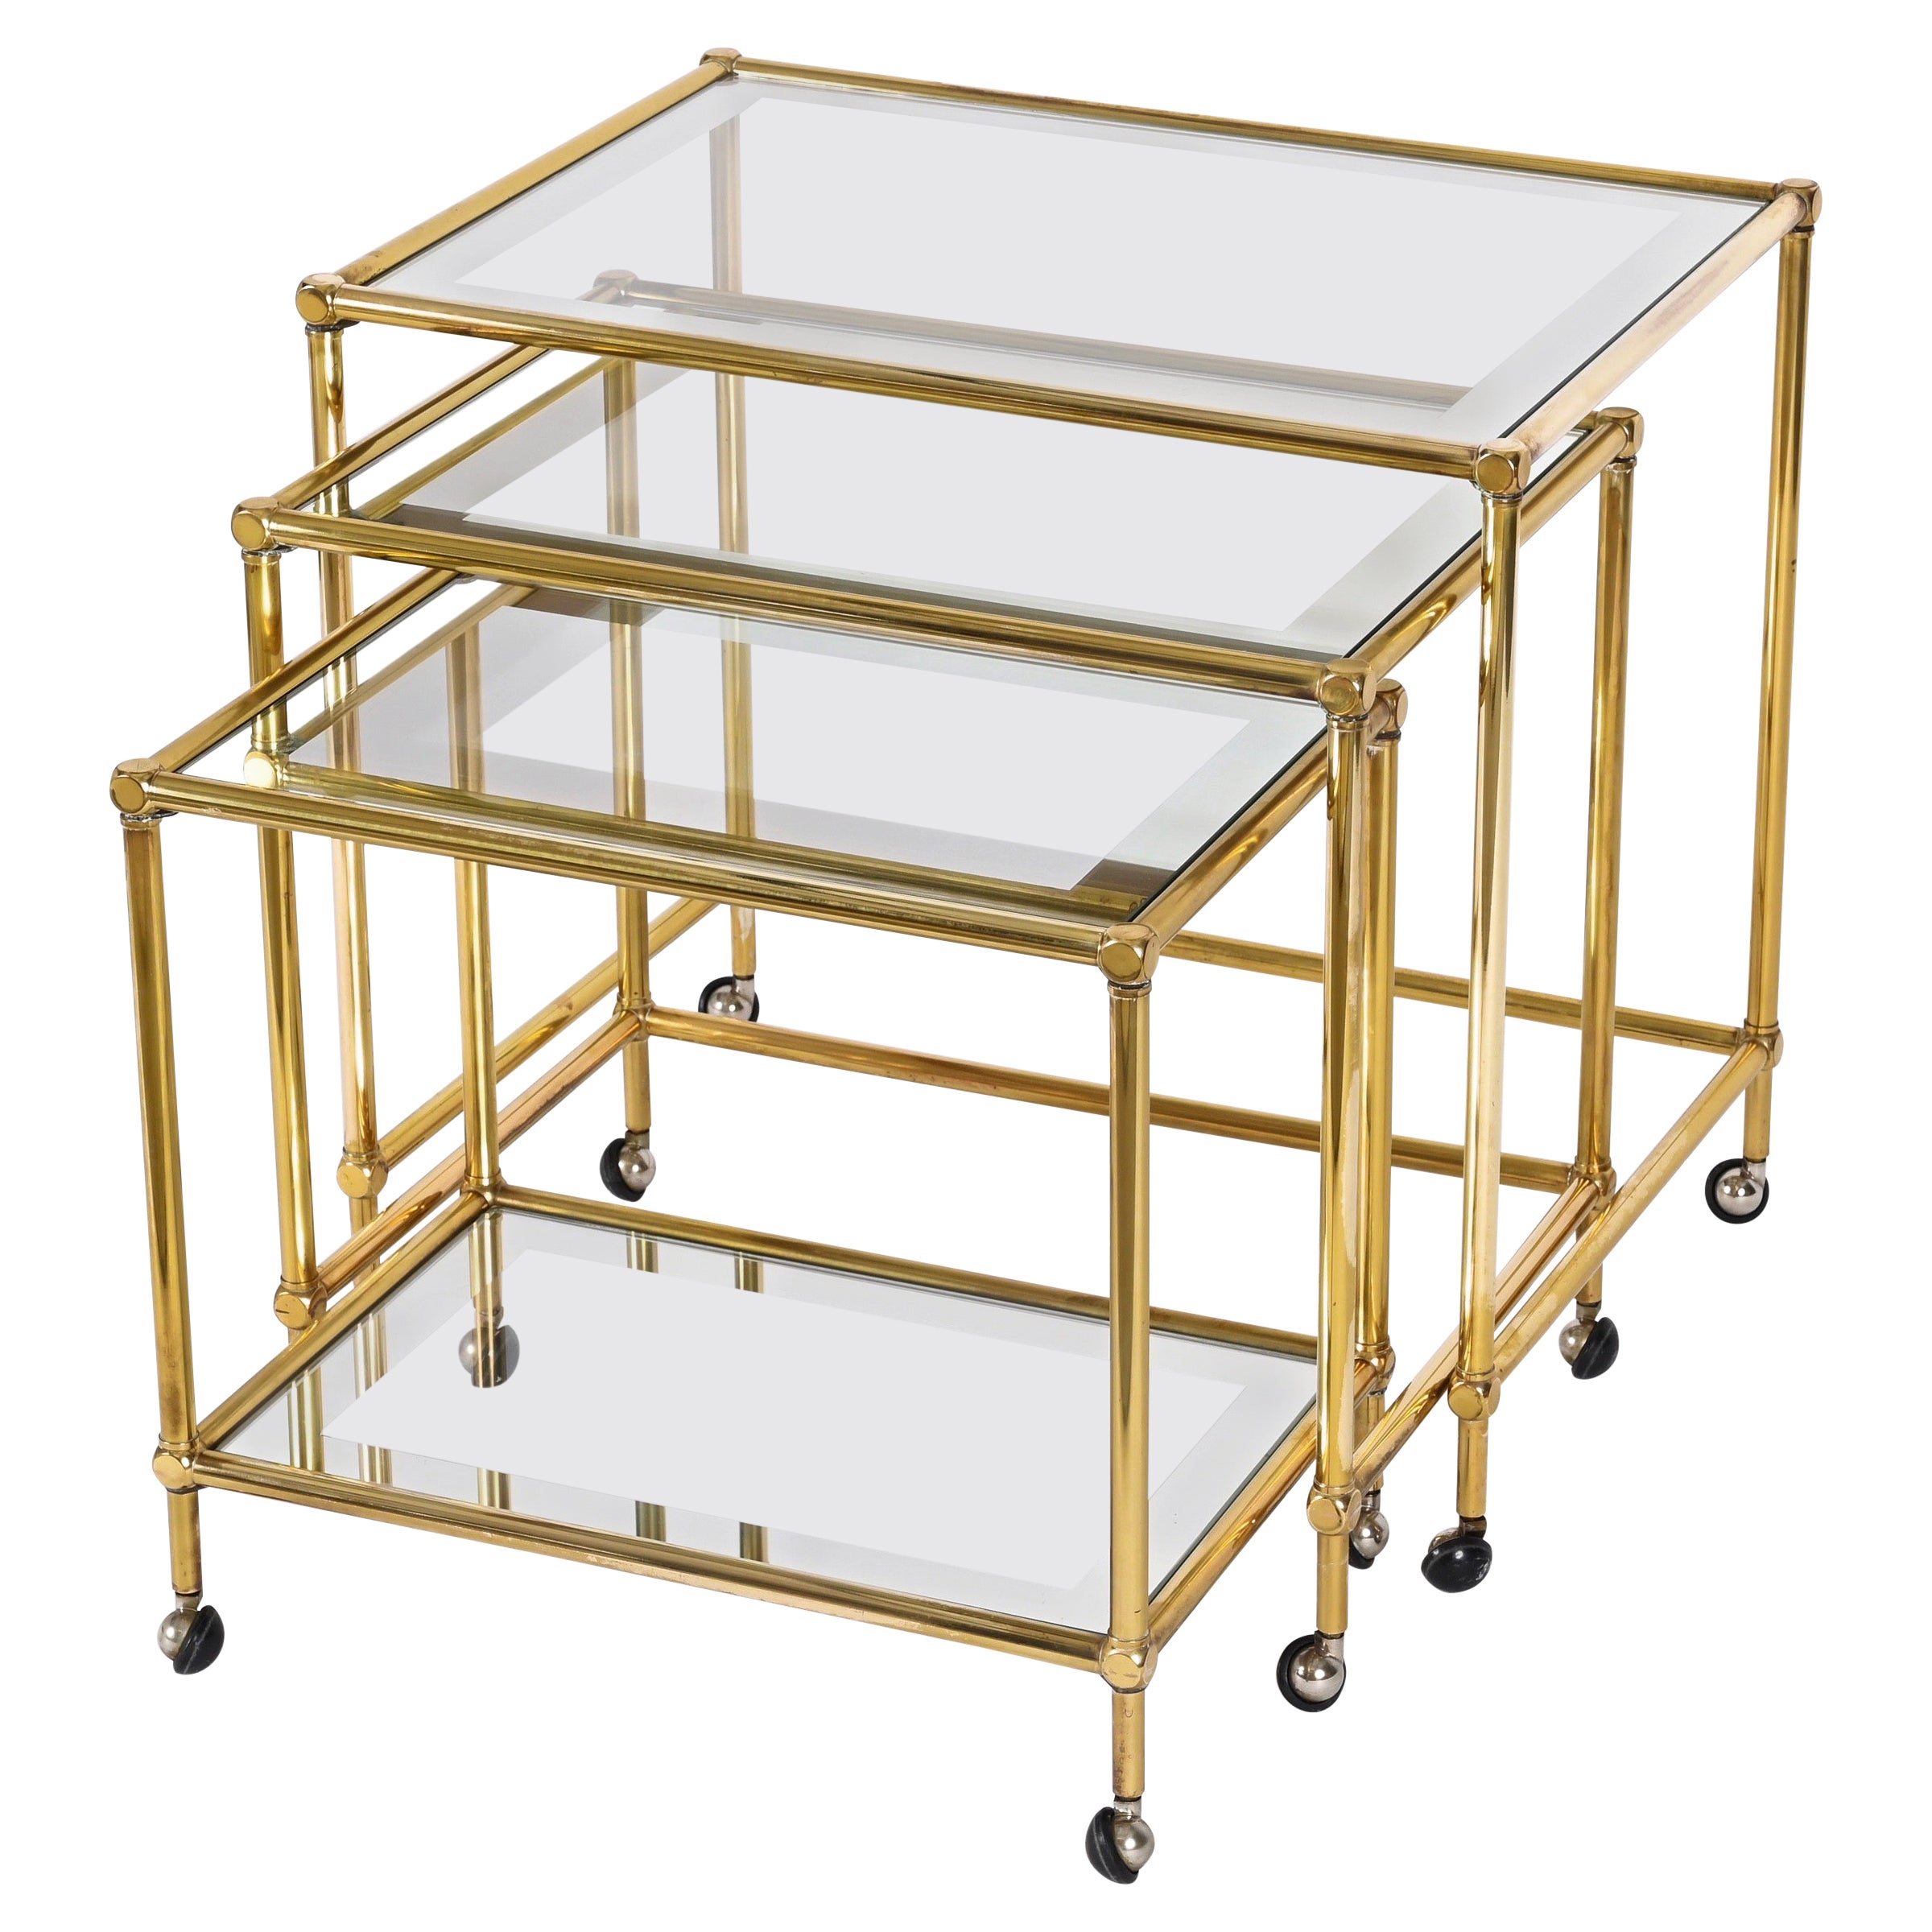 Set of Brass Mirrored Border with Glass Top Nesting Tables, Maison Jansen, 1970s